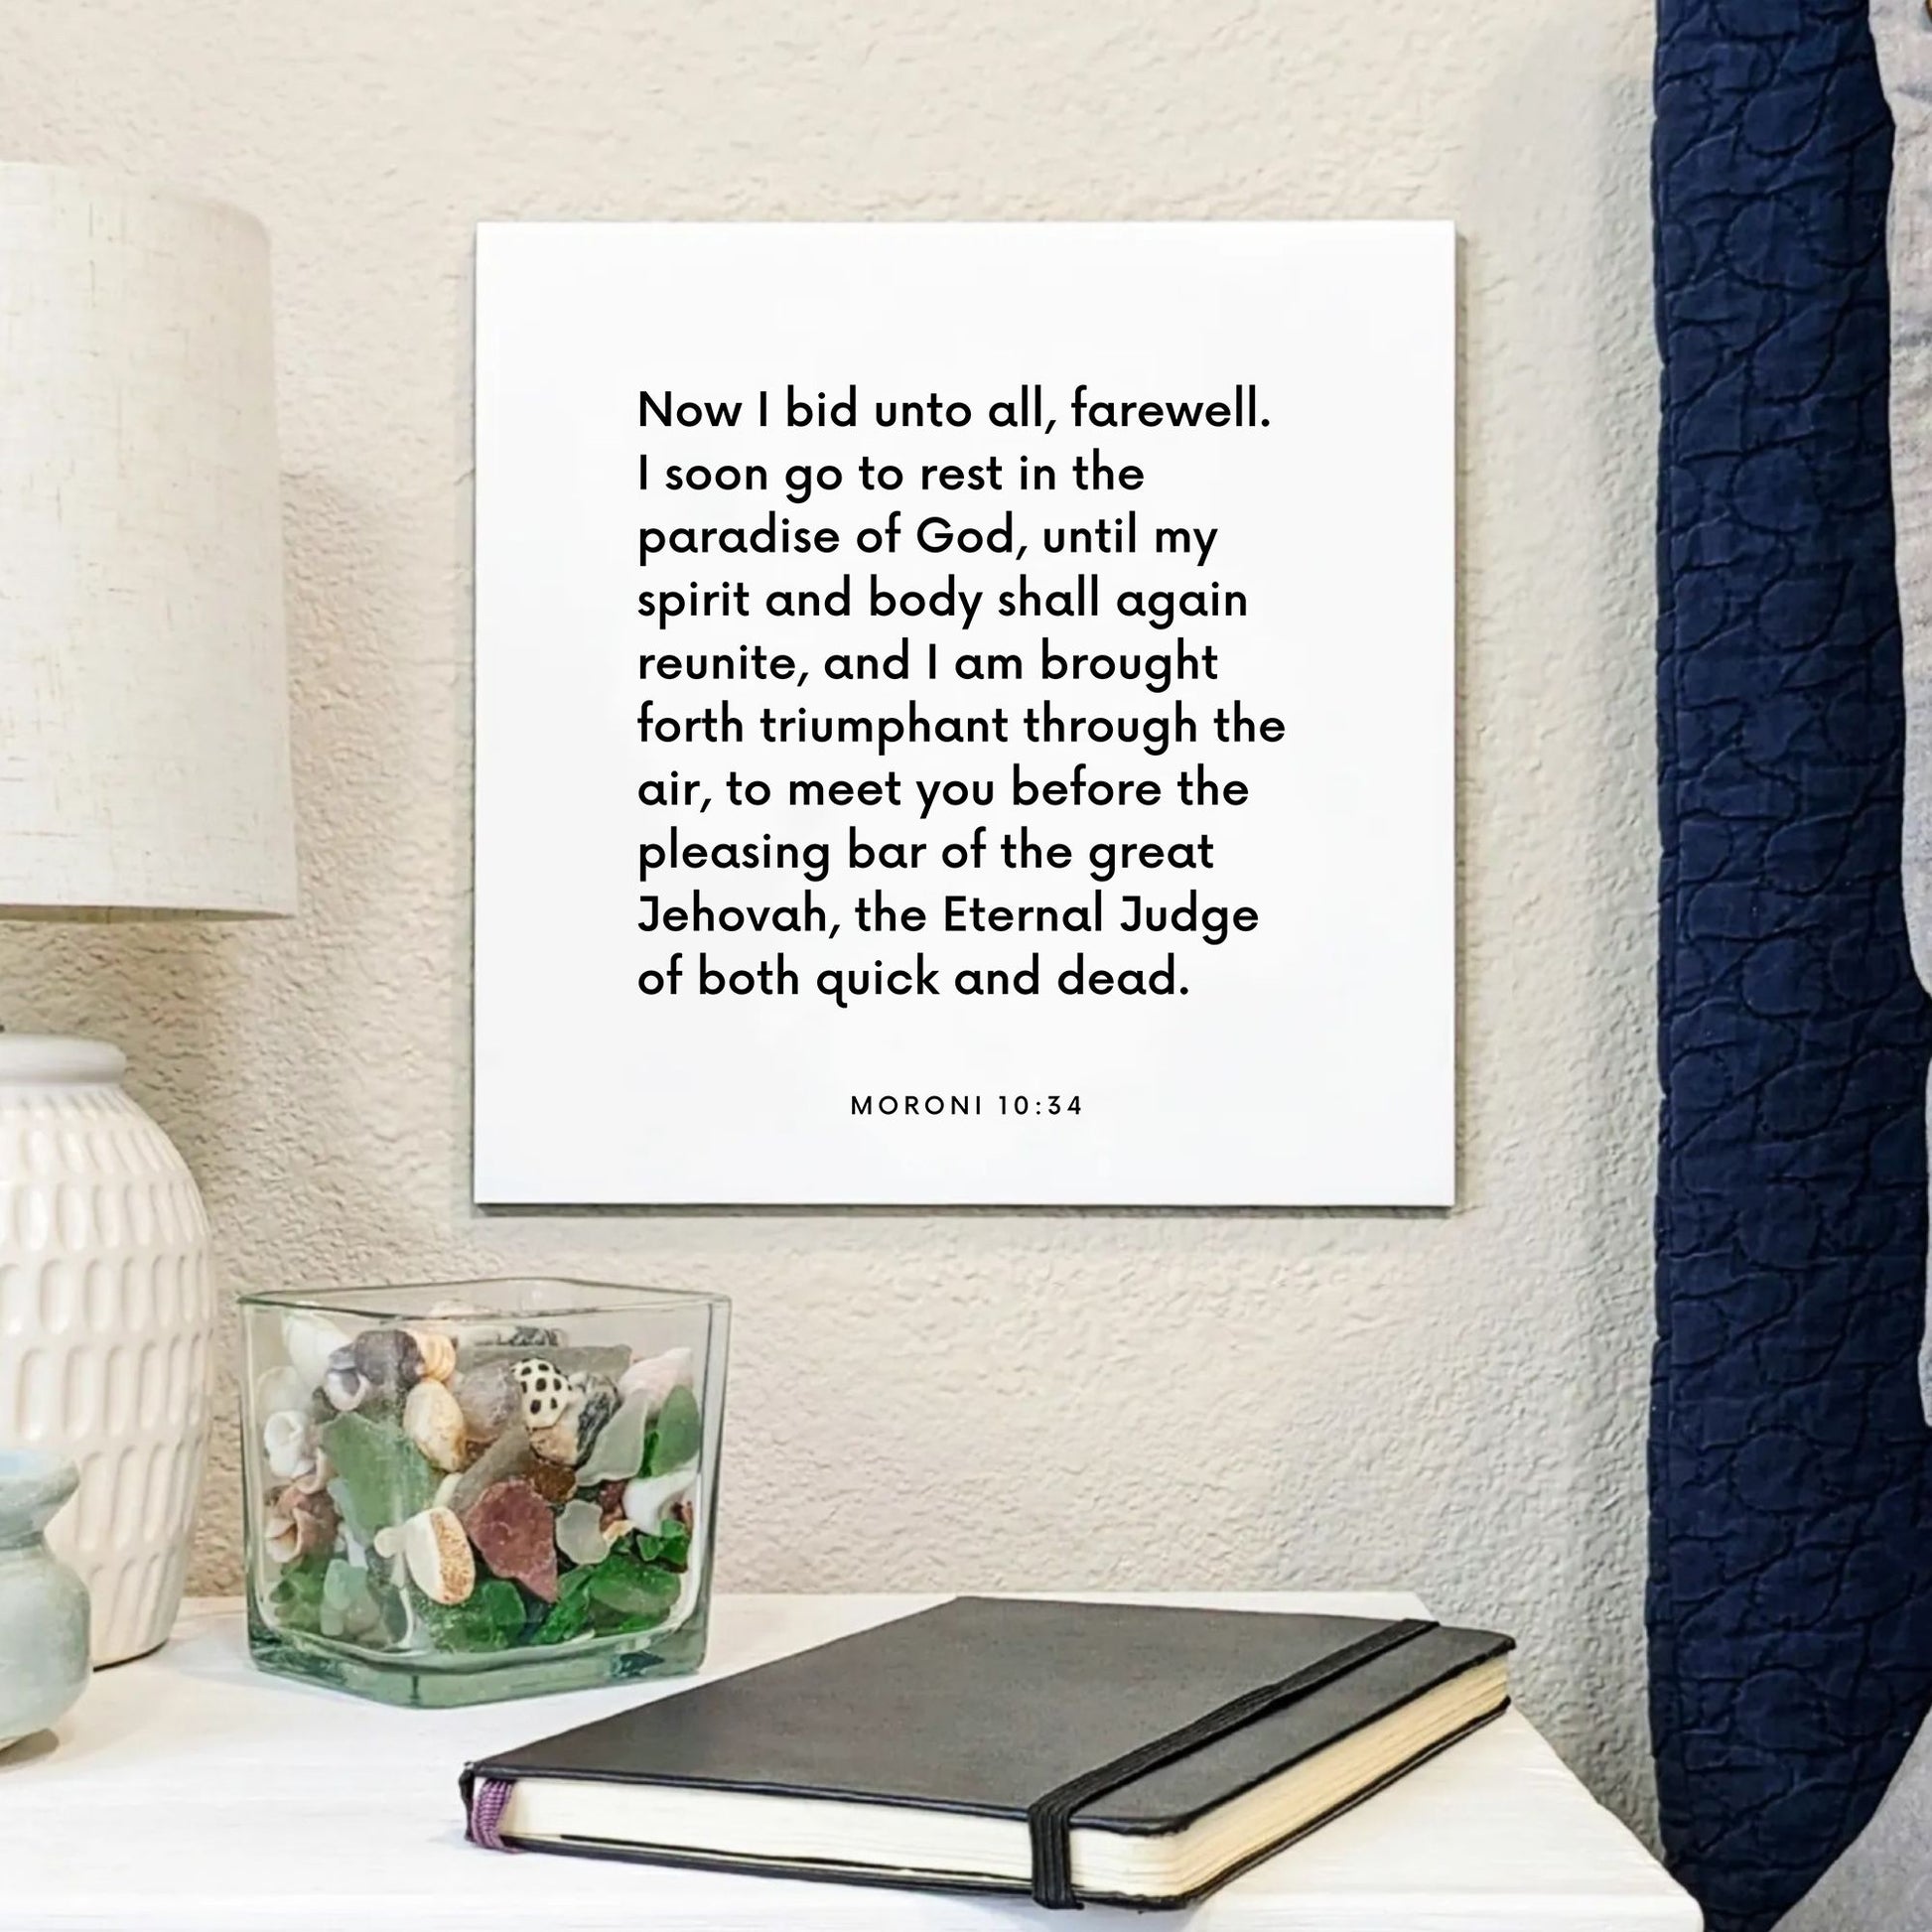 Bedside mouting of the scripture tile for Moroni 10:34 - "I soon go to rest in the paradise of God"